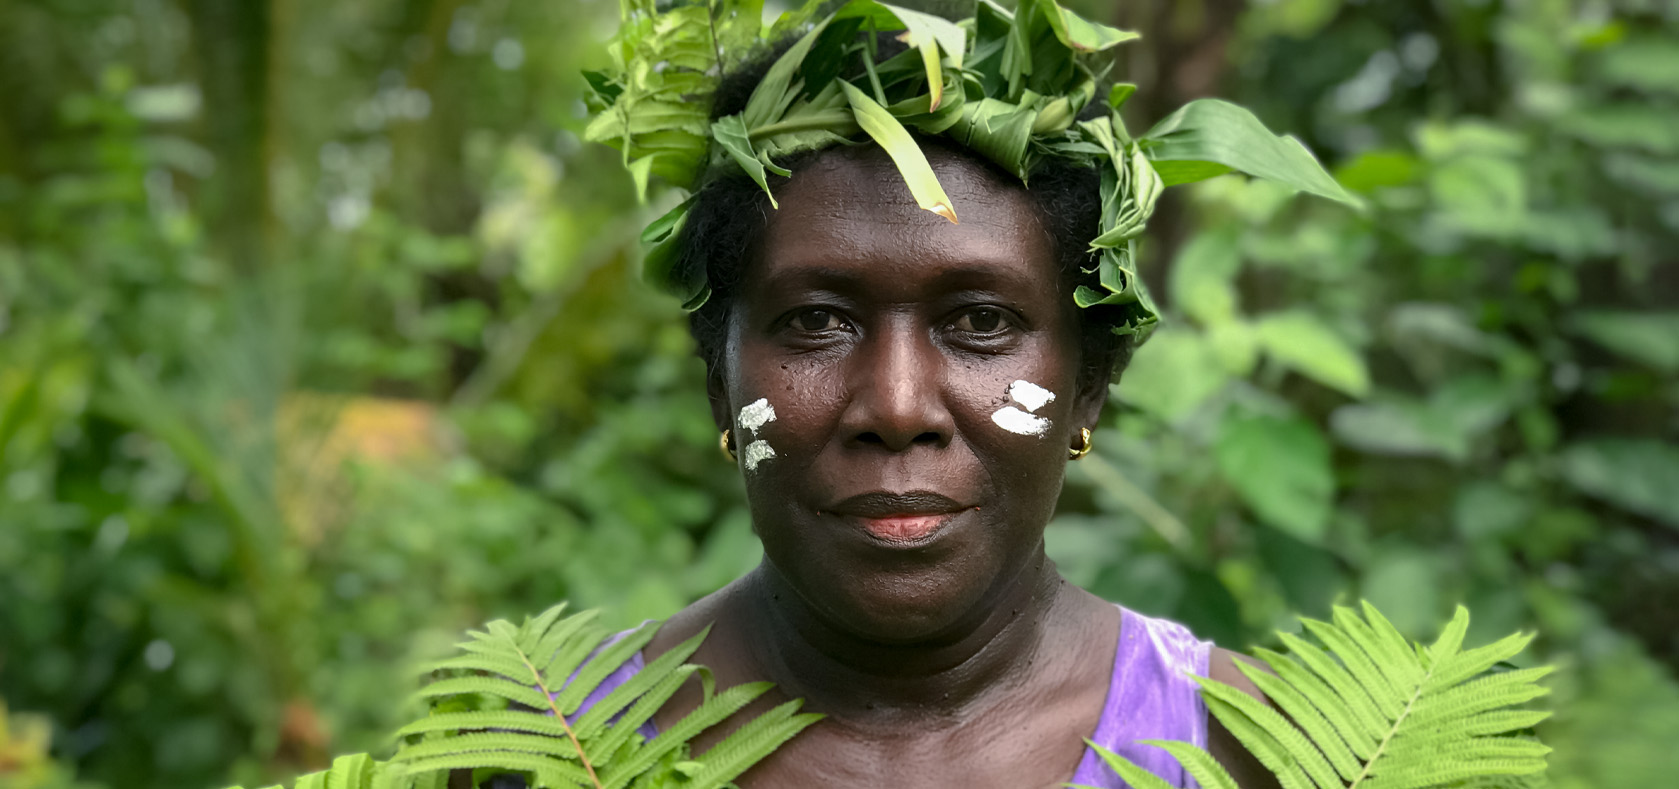 Rendy Solomon, from Gizo, Solomon Islands. She is an advocate for women leading climate solutions and heads a collective called Plasticwise Gizo. Photo: United Nations/Rose